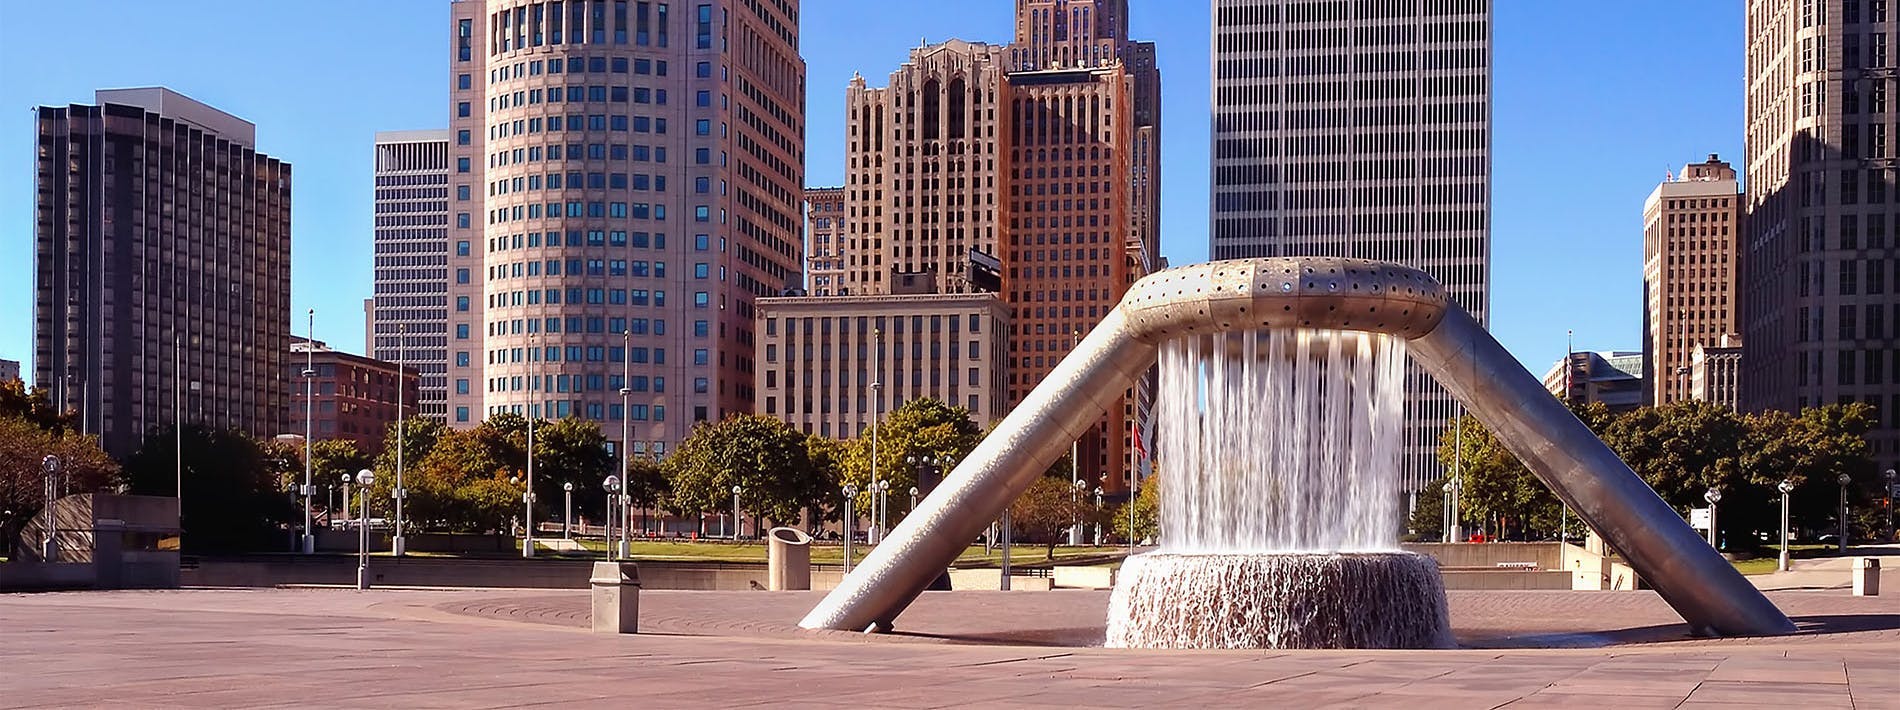 Detroit Downtown City Fountain in Park 